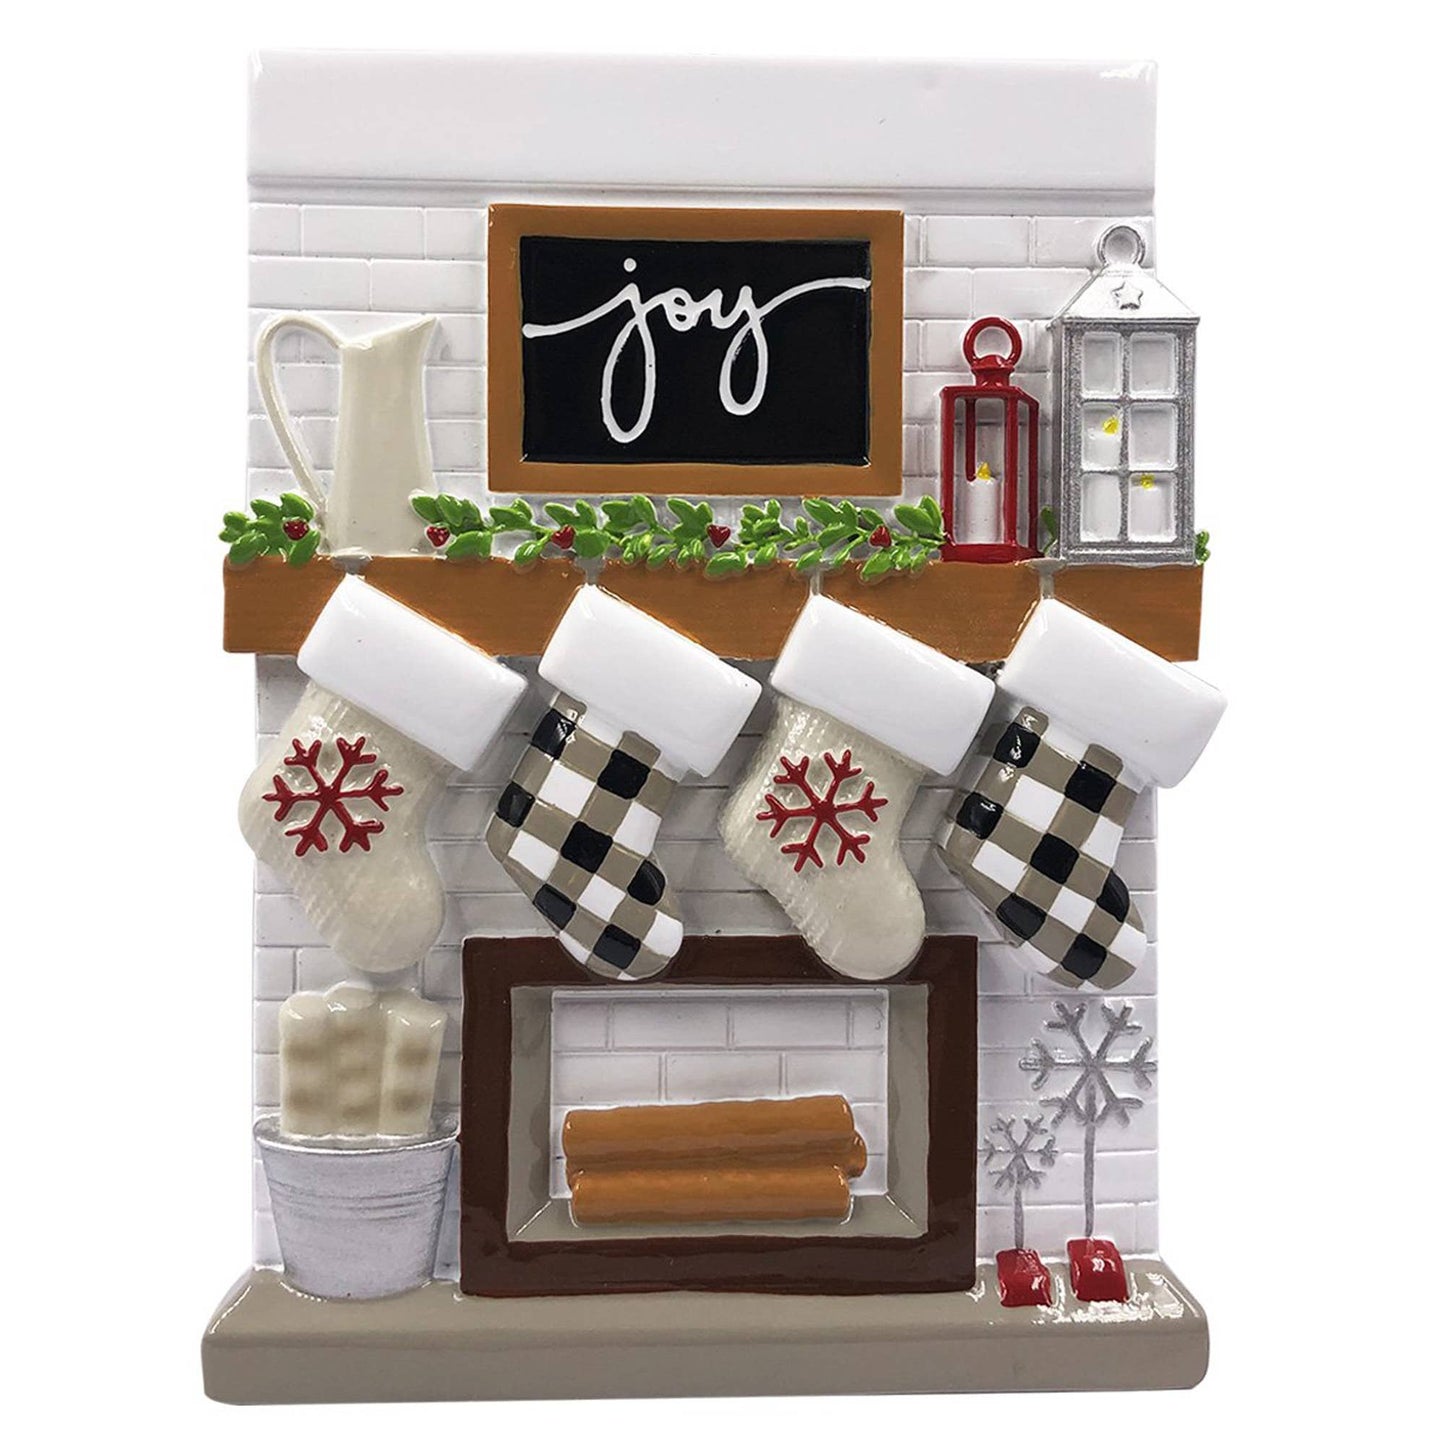 Fireplace Mantle 5 Family Personalized Christmas Ornament